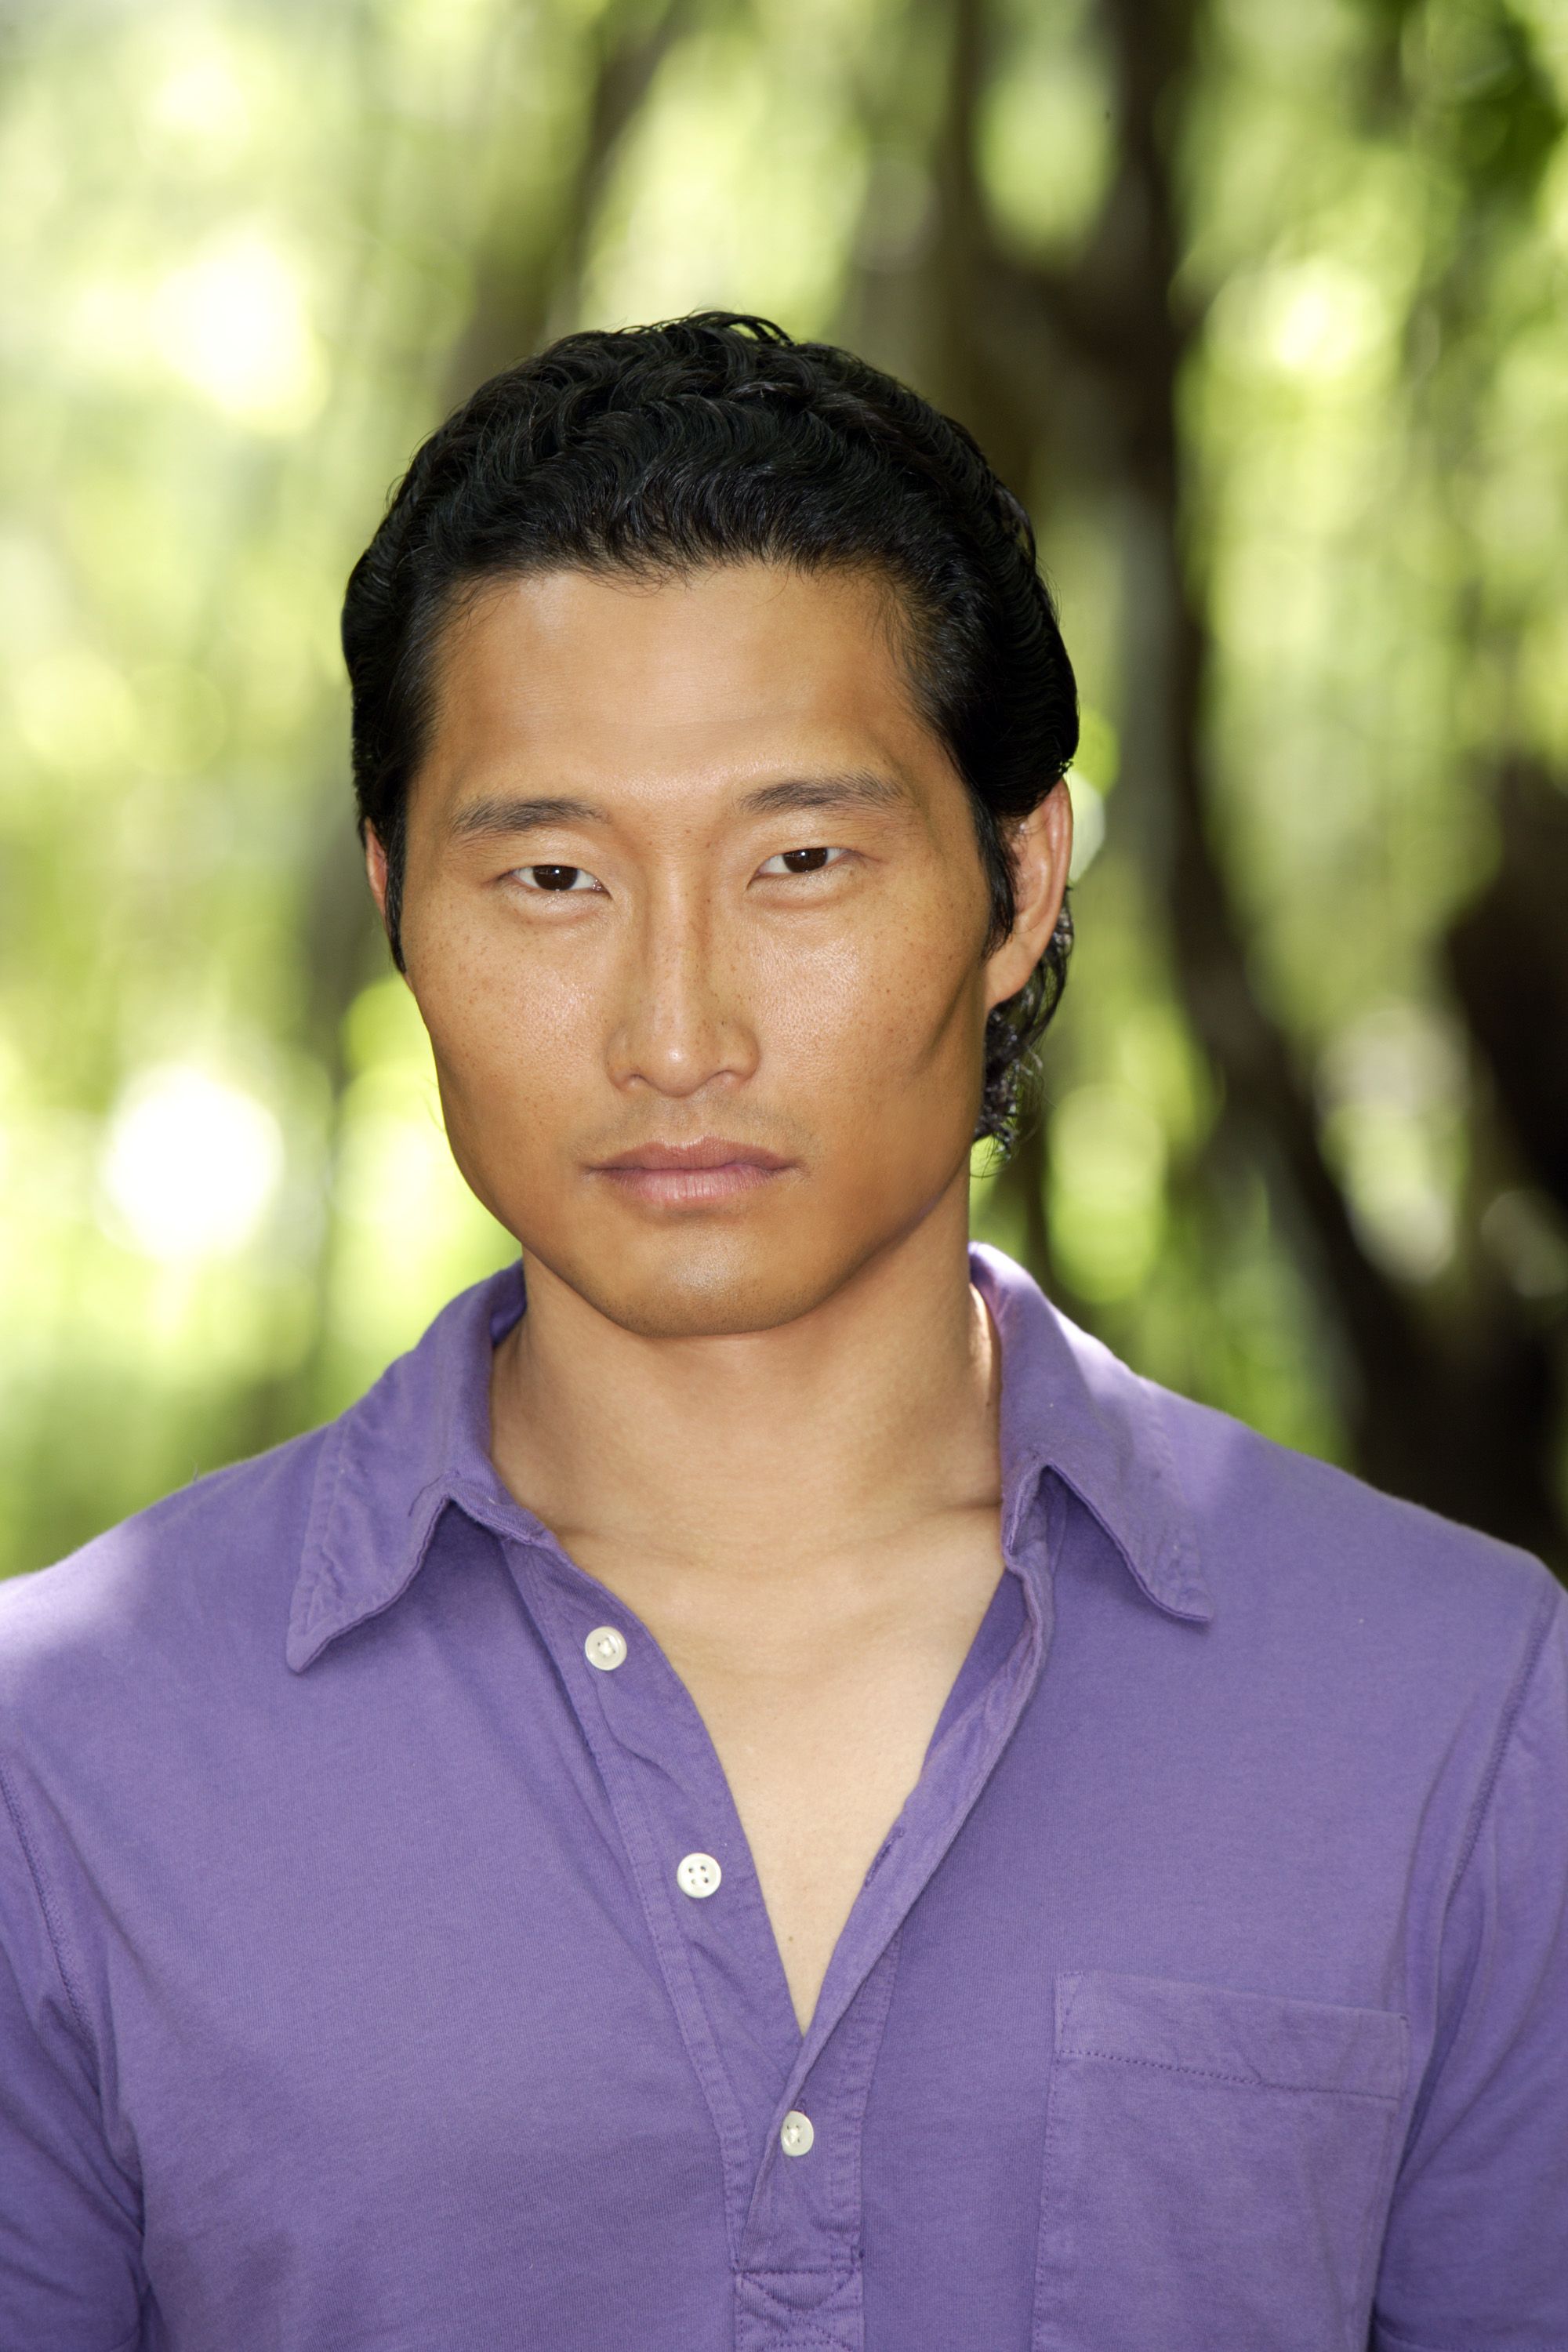 Lost S3 Daniel Dae Kim As Jin Soo Kwon. Lost Poster, Actors, Celebrity Picture